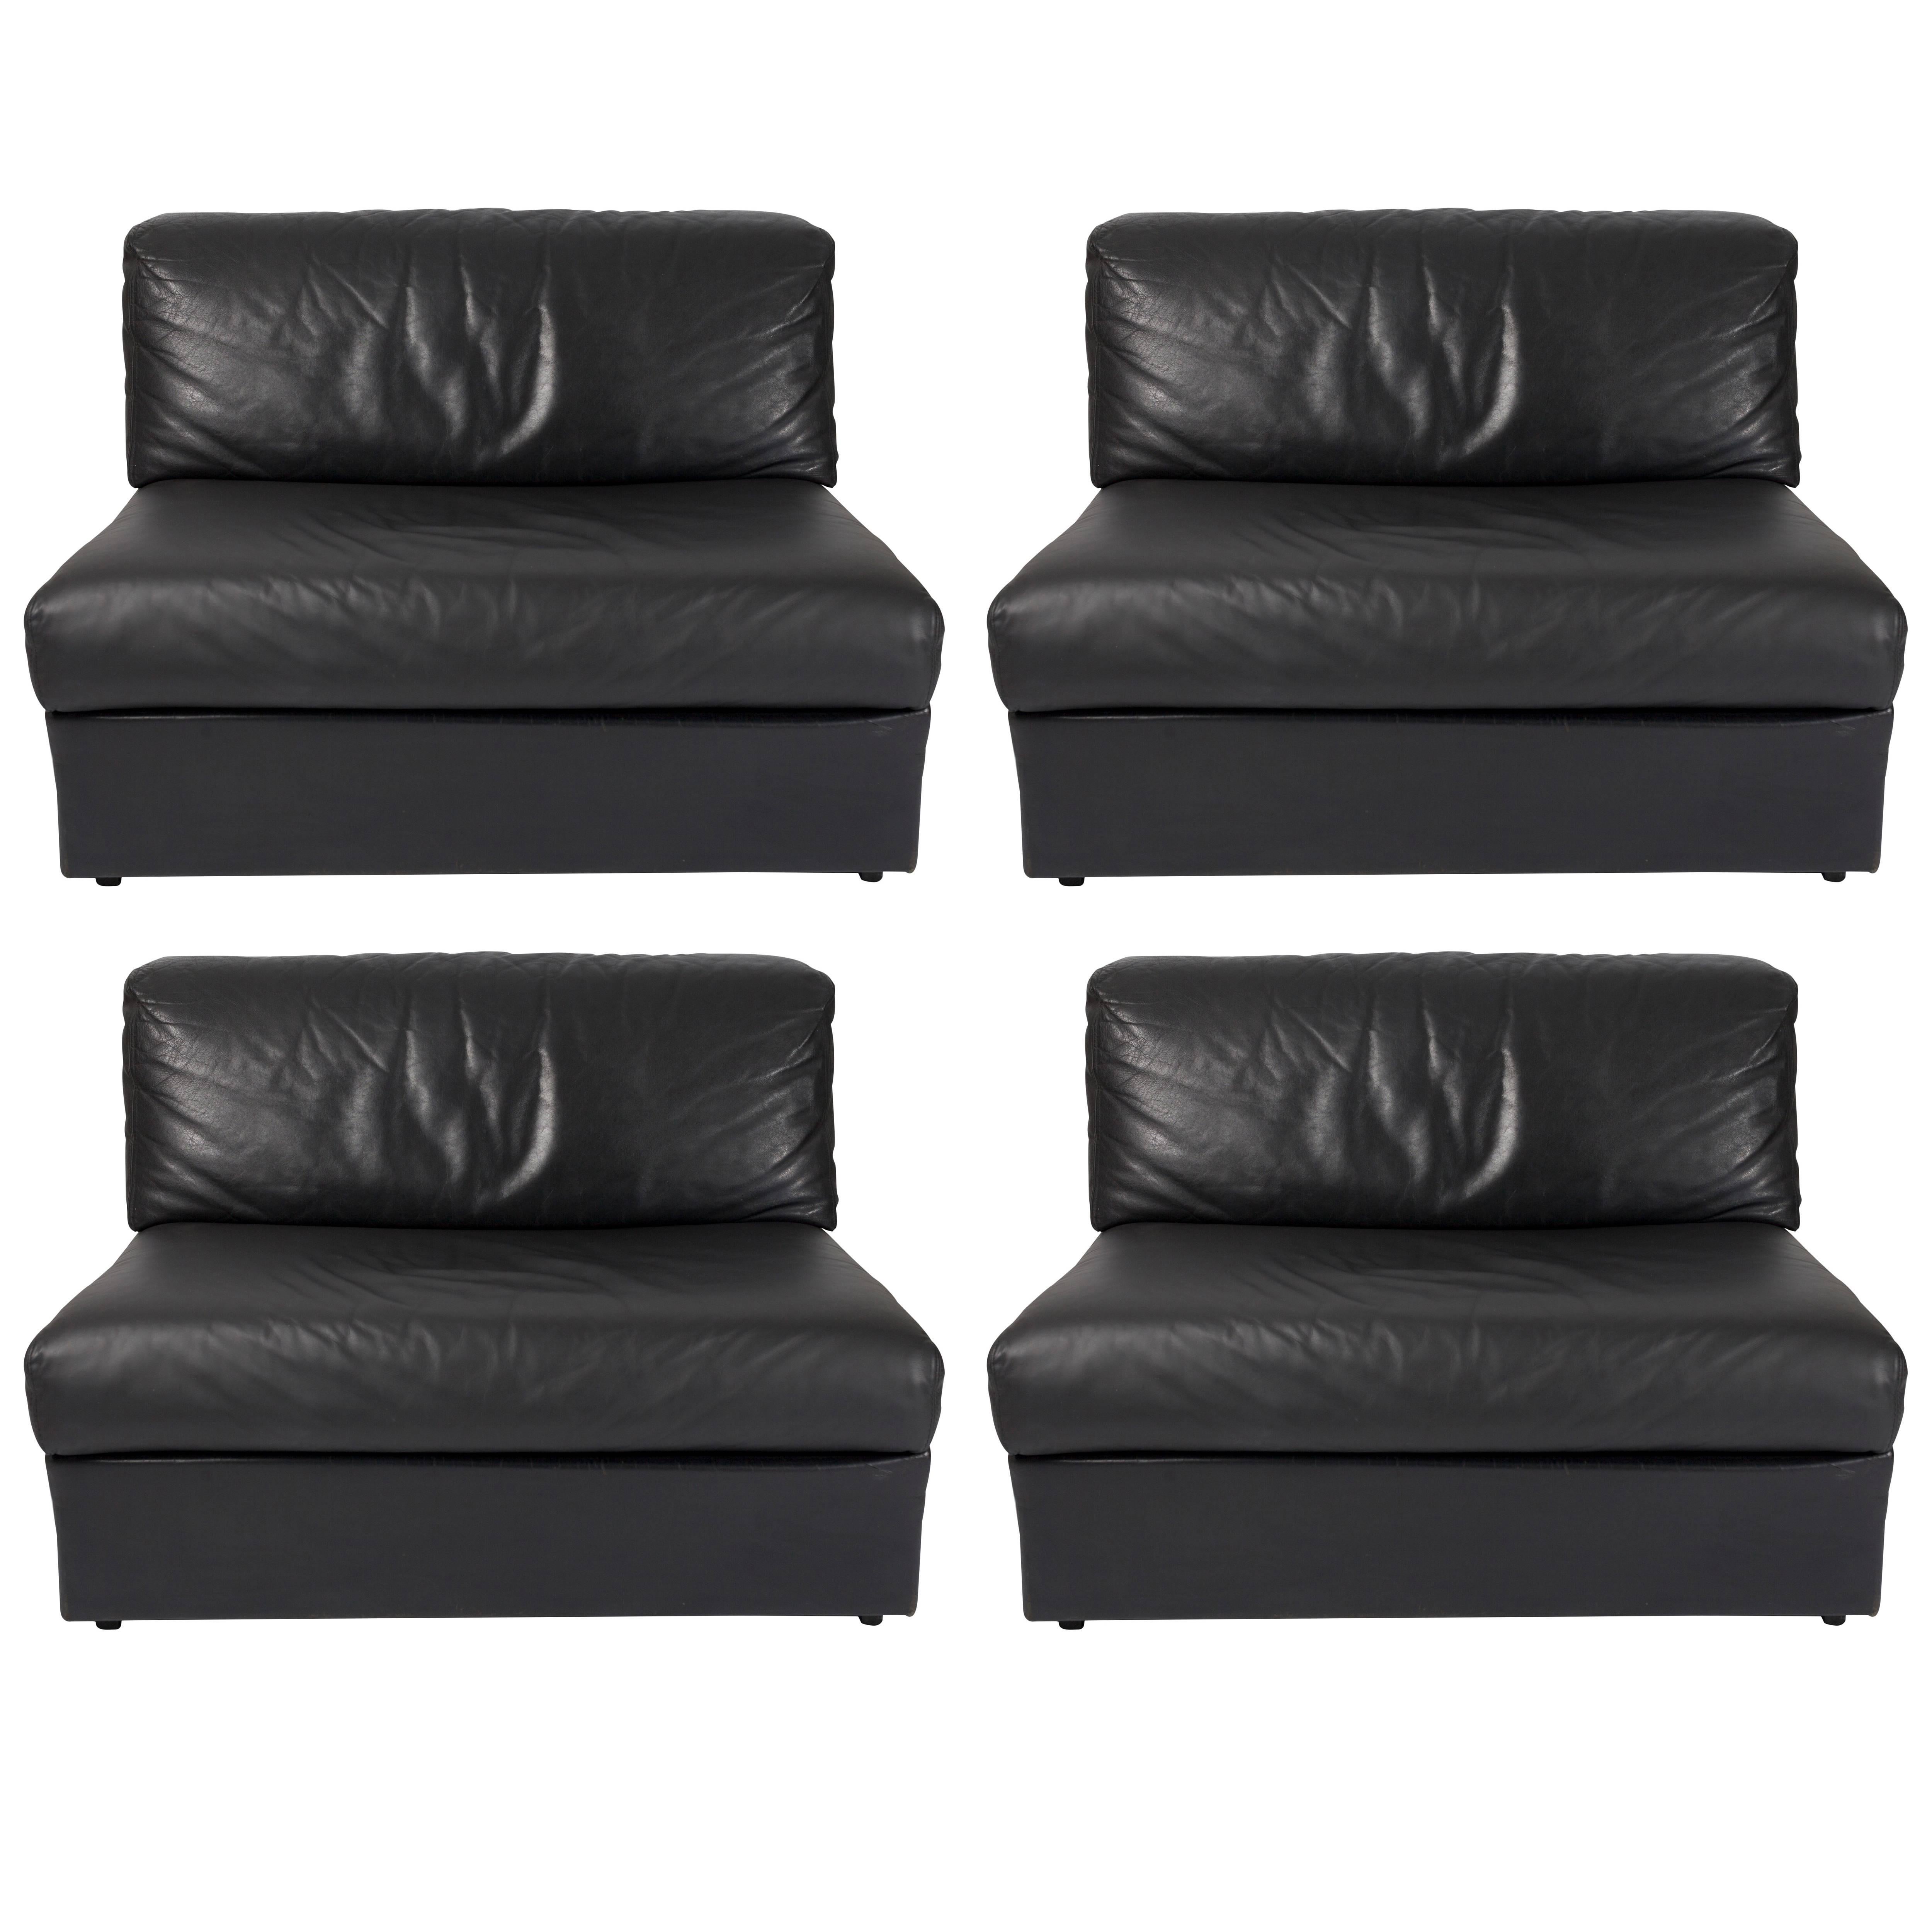 Black Leather Sectional Sofa in the Style of De Sede